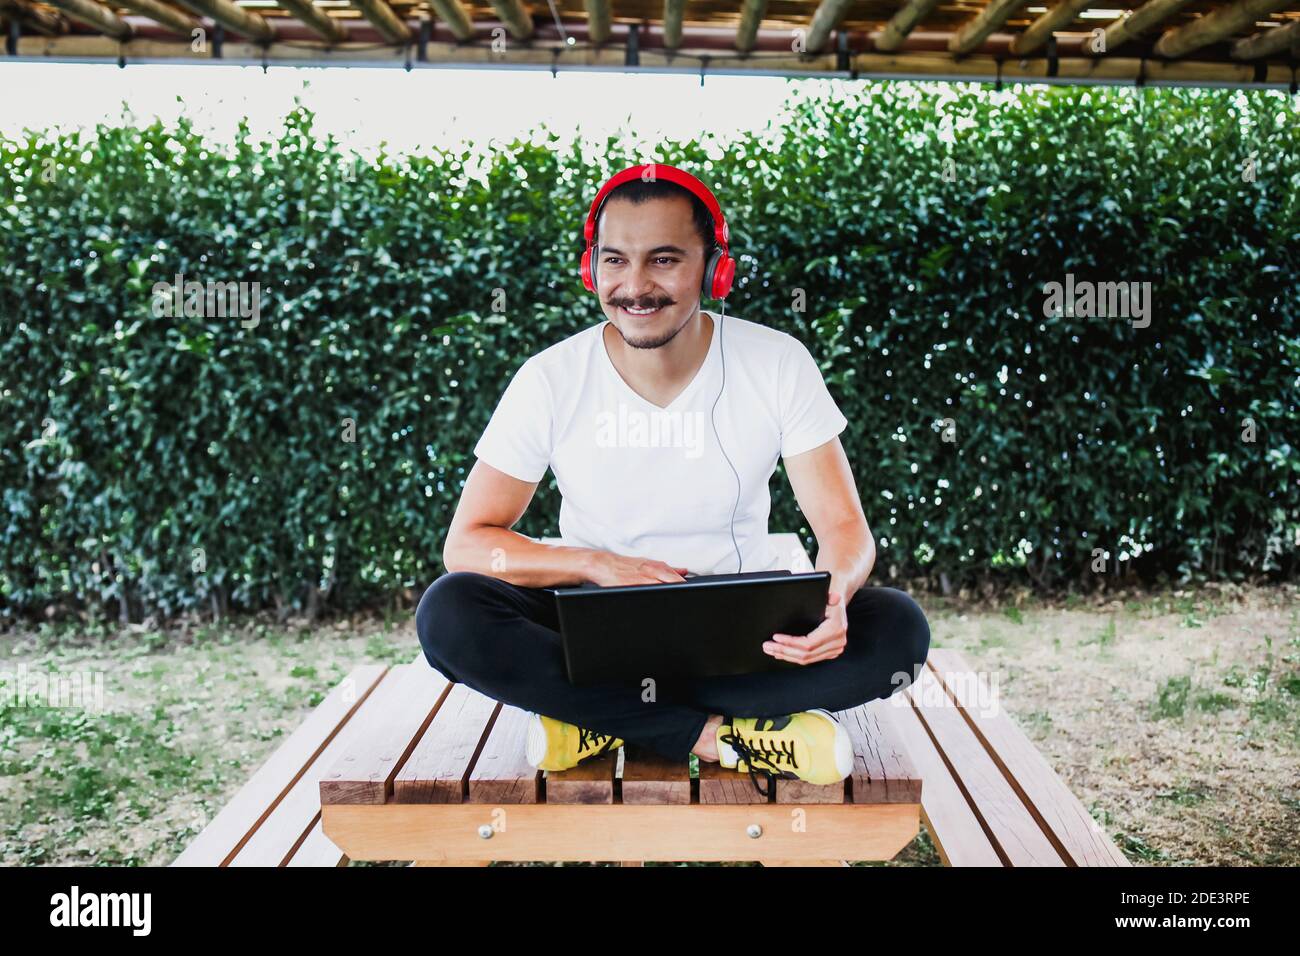 latin man with laptop and headphones at home terrace outdoor in Mexico Stock Photo